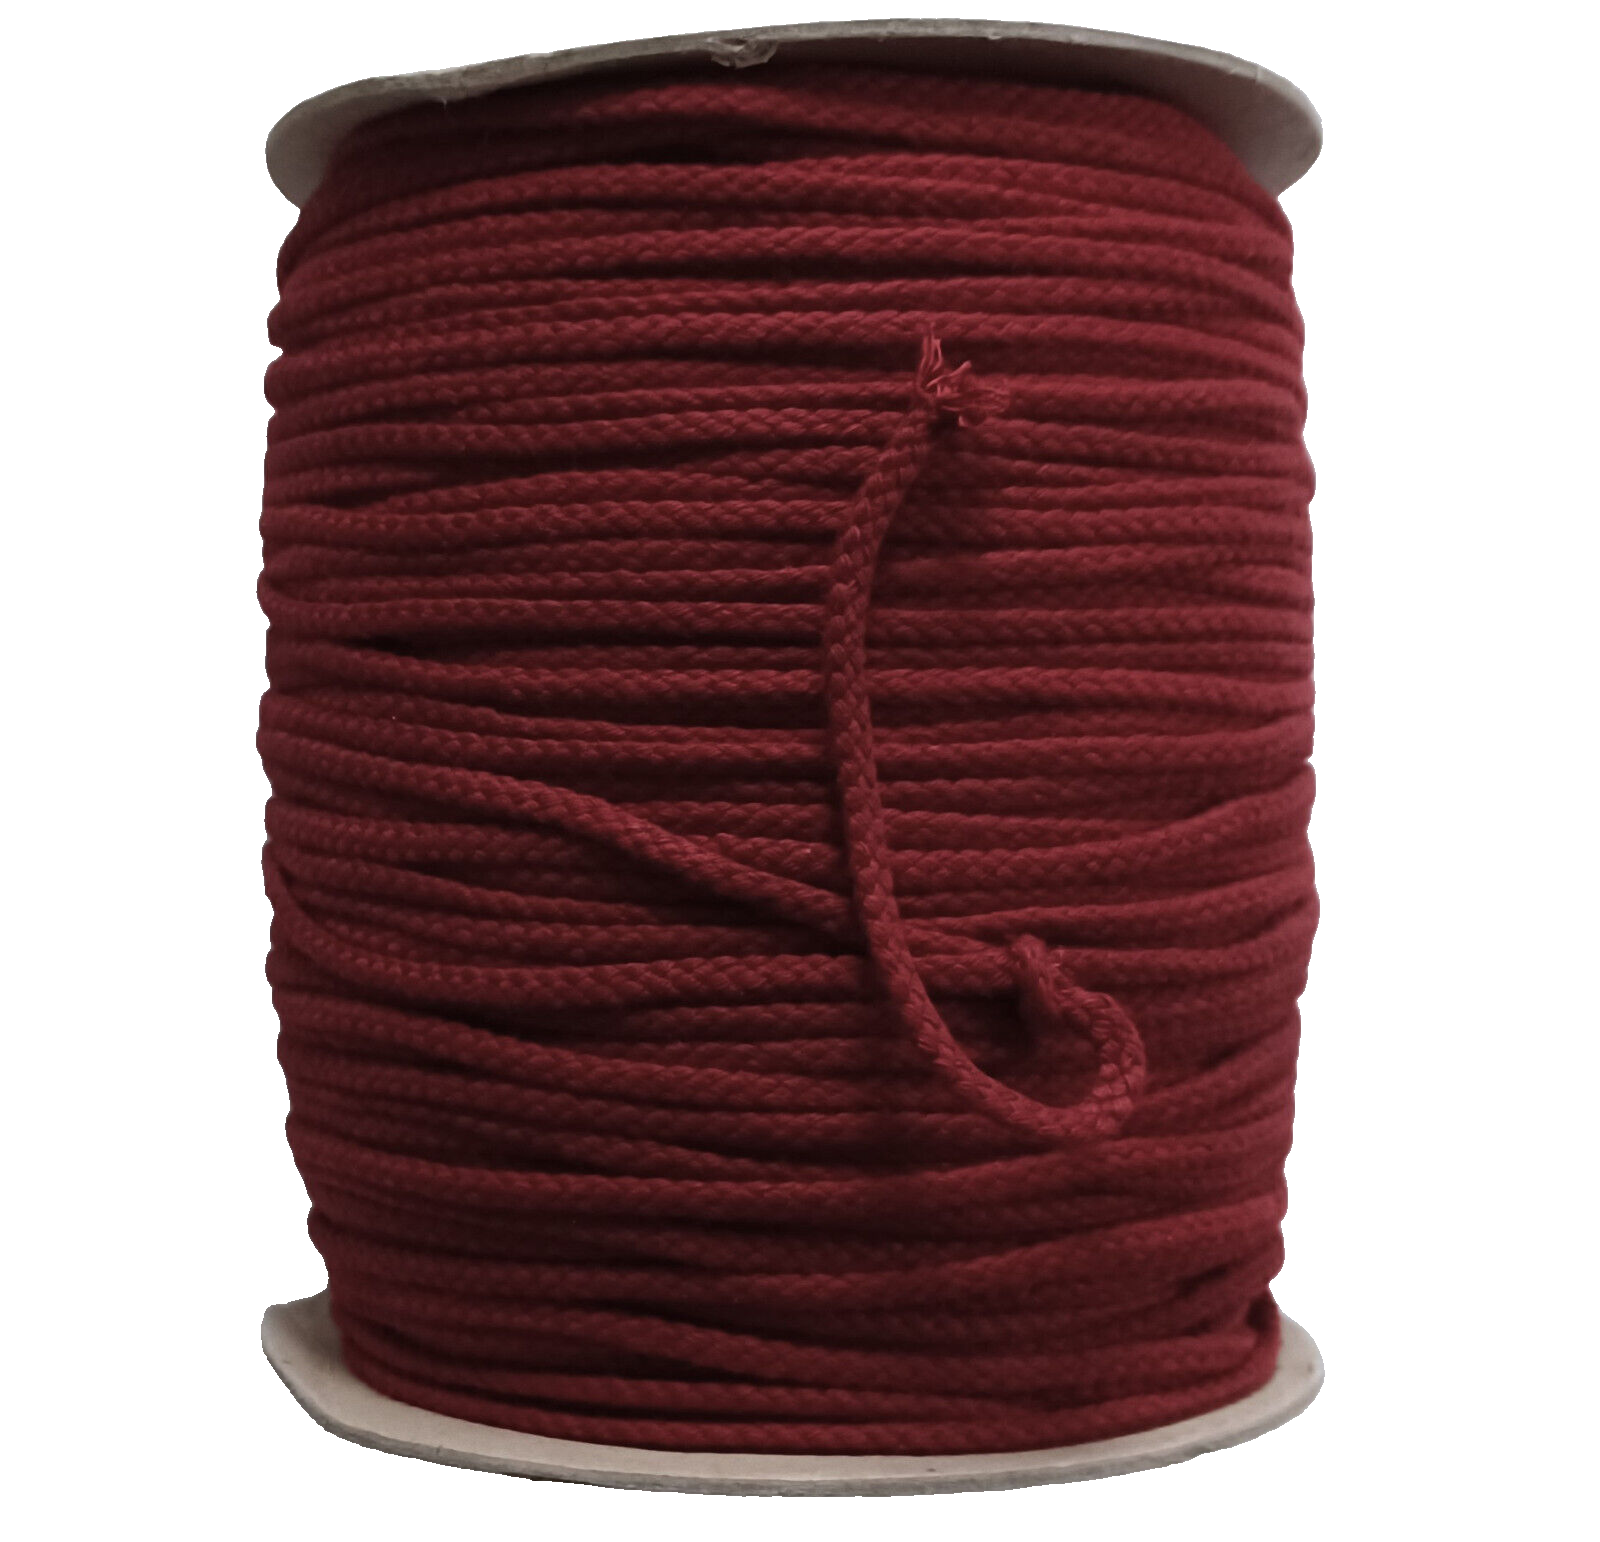 Deepest Red 3/16" Cotton Drawstring Cord